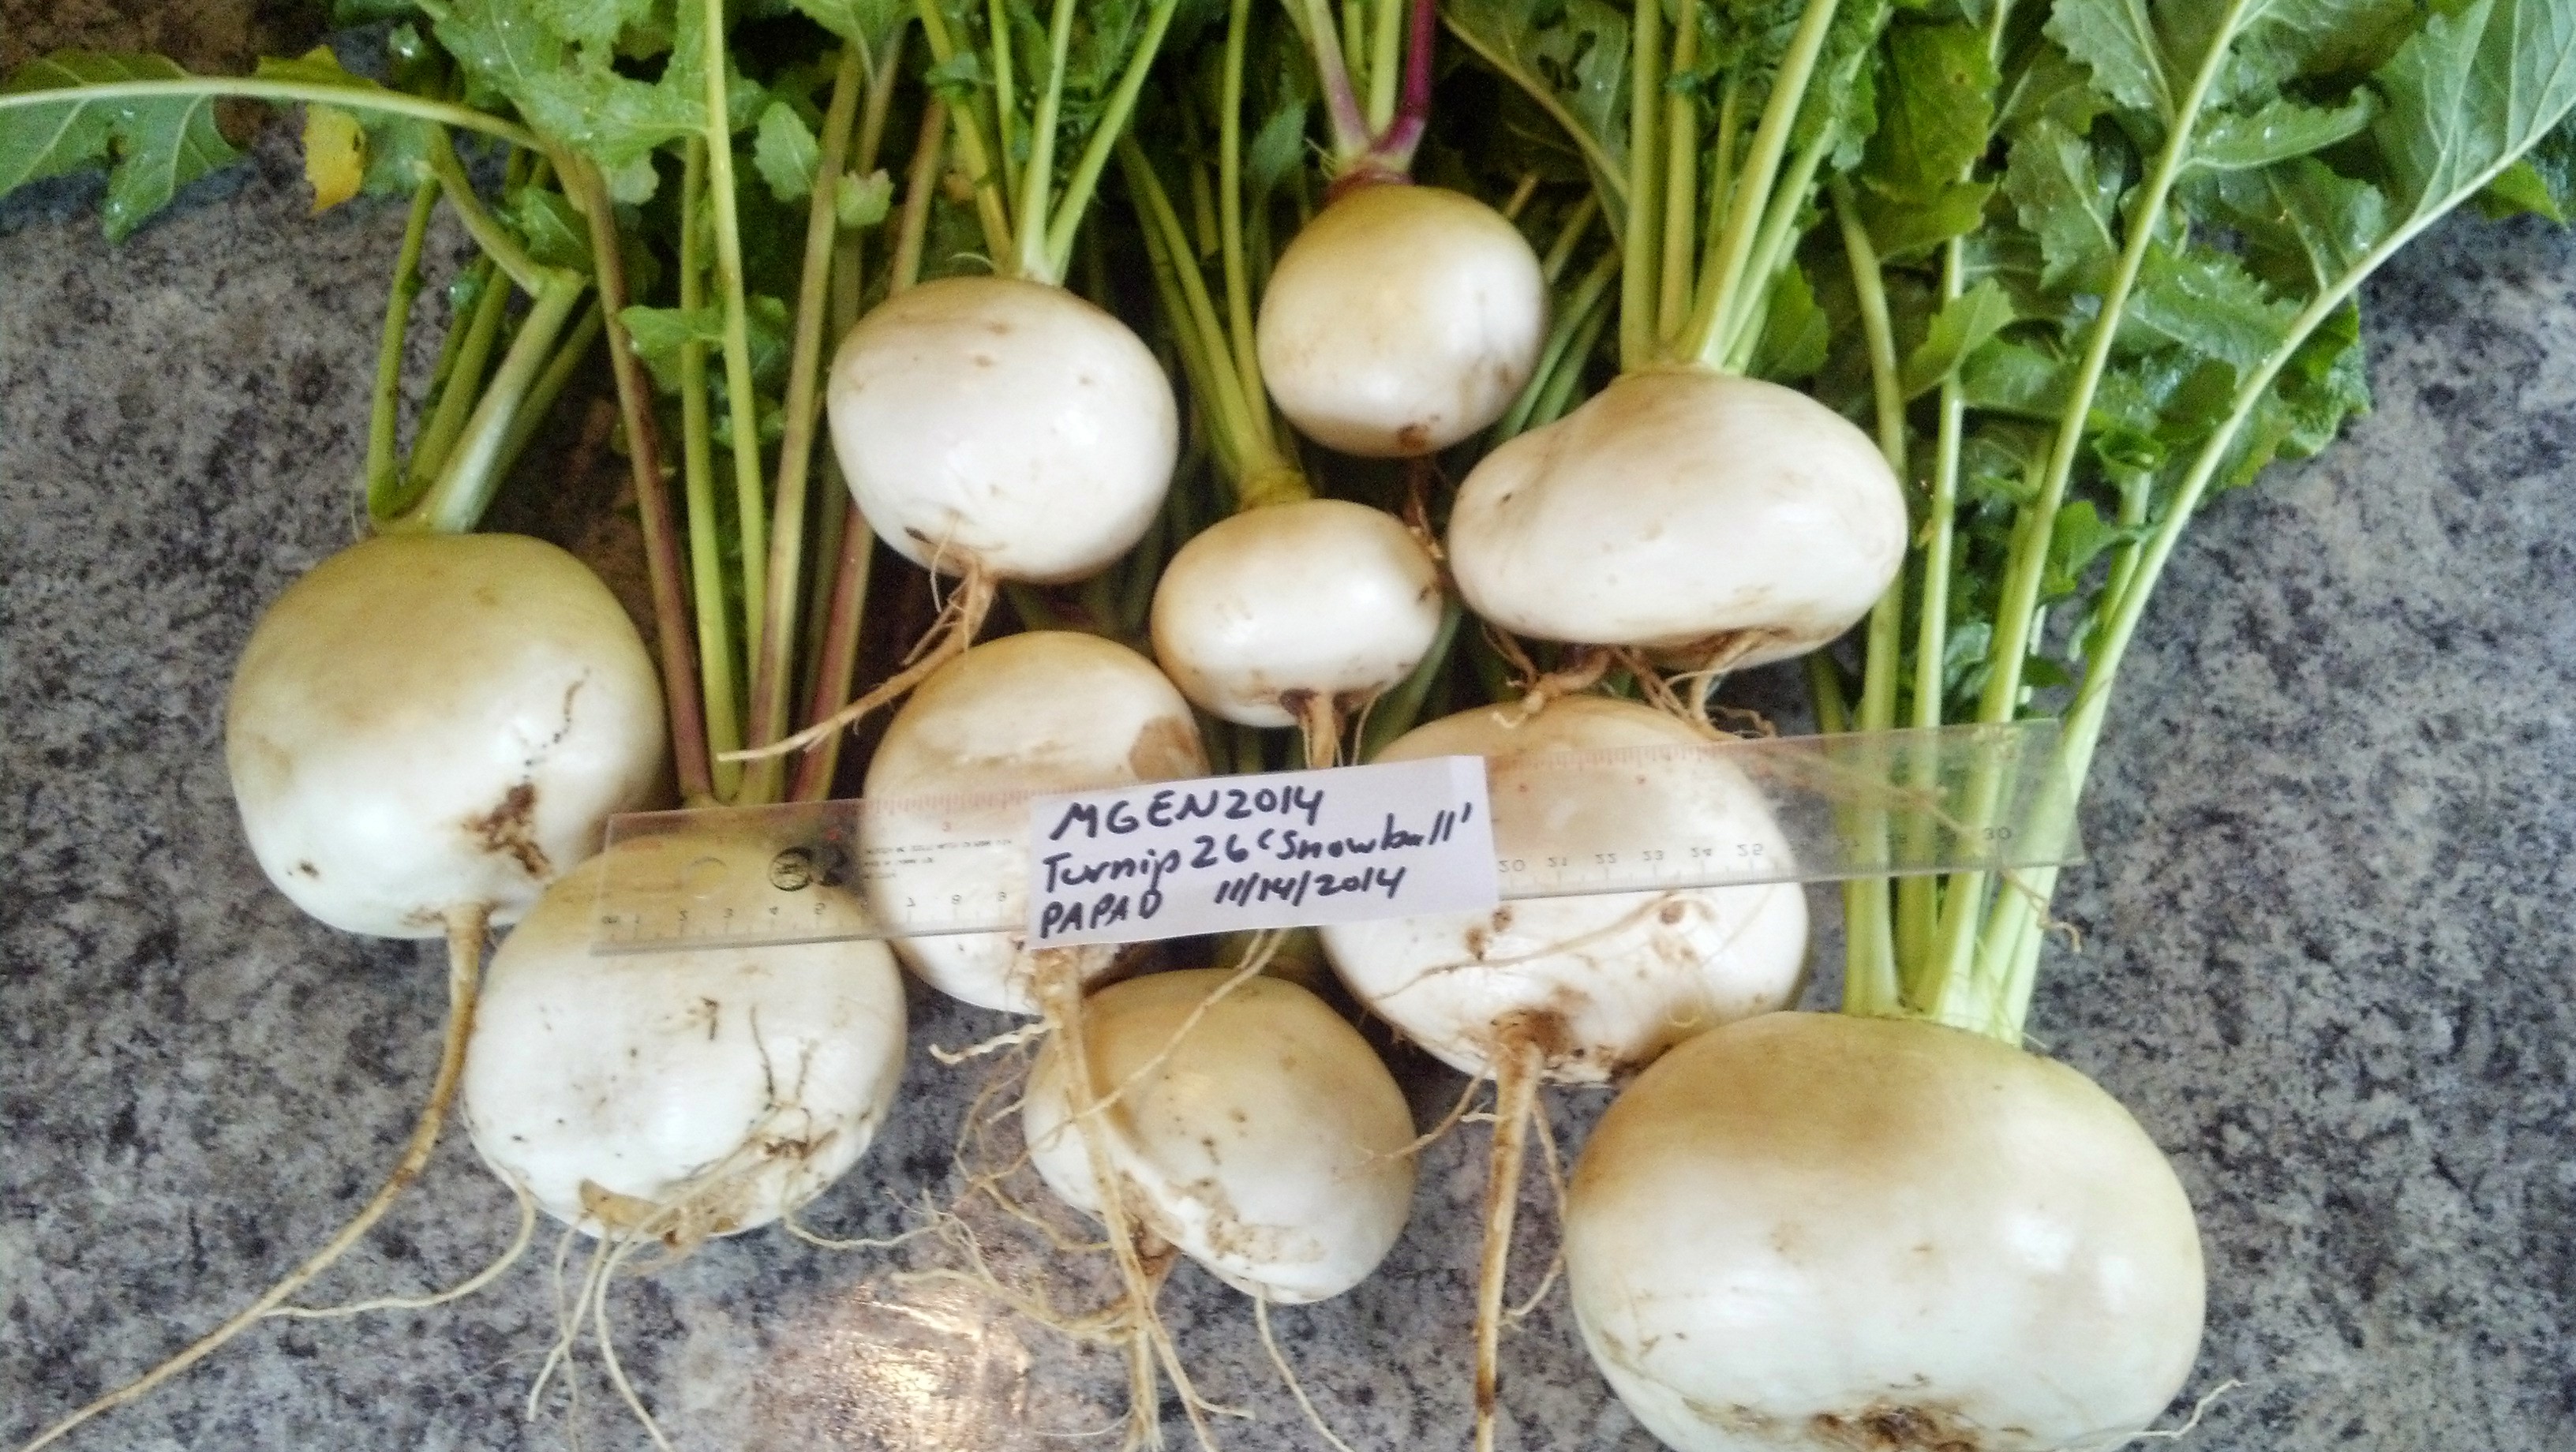 Snowball%20turnips%20greens%20and%20roots[1].jpg